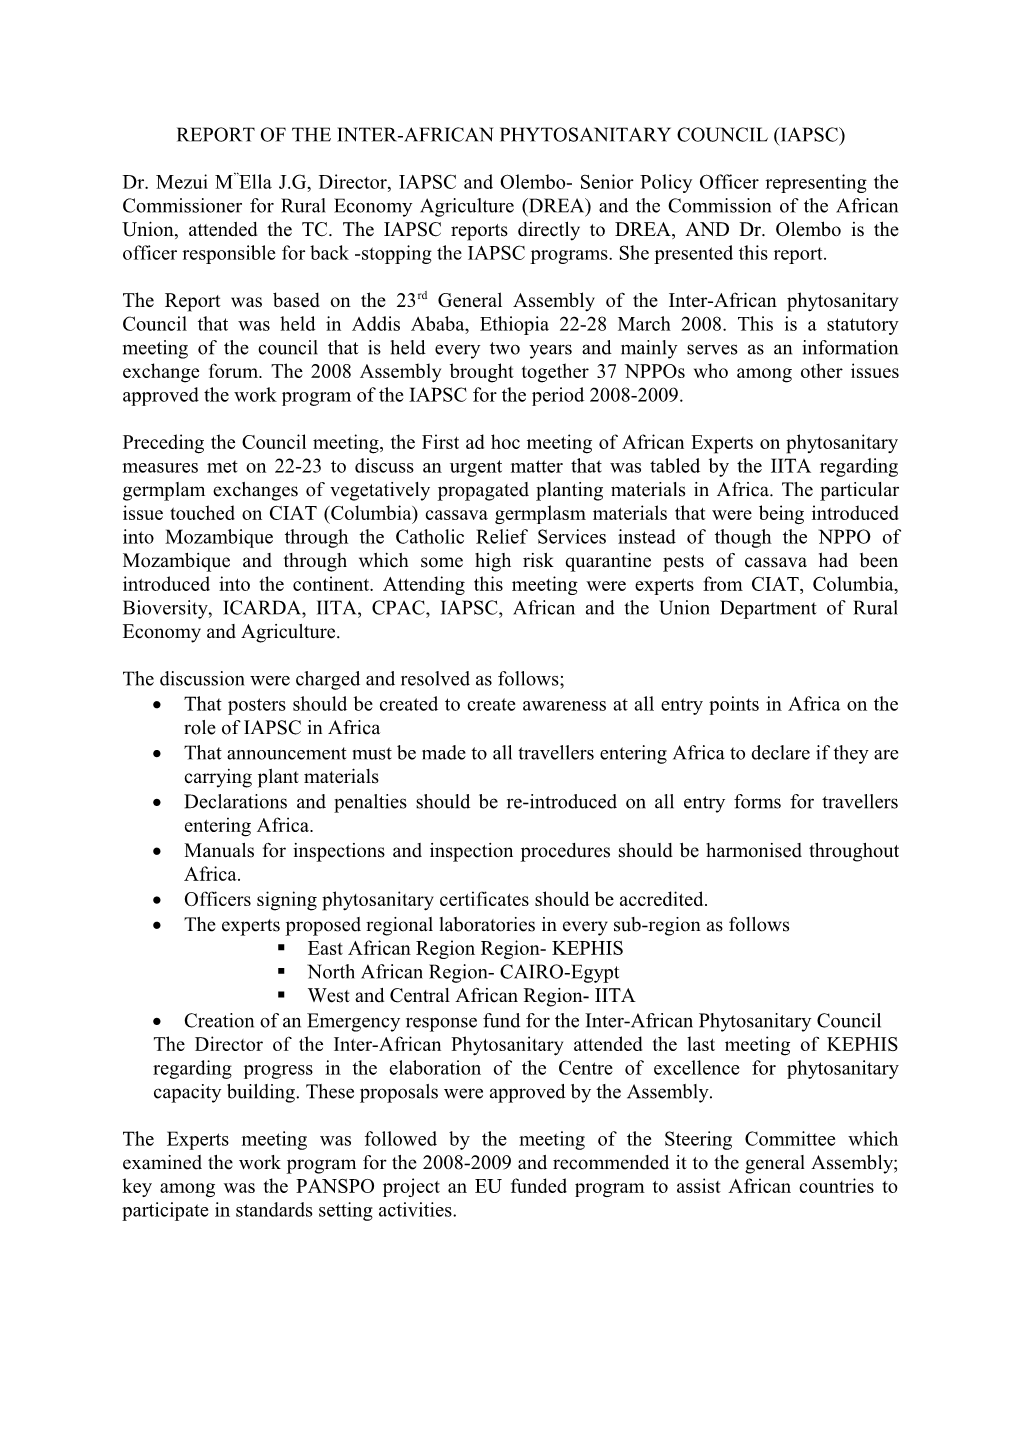 Report of the Inter-African Phytosanitary Council